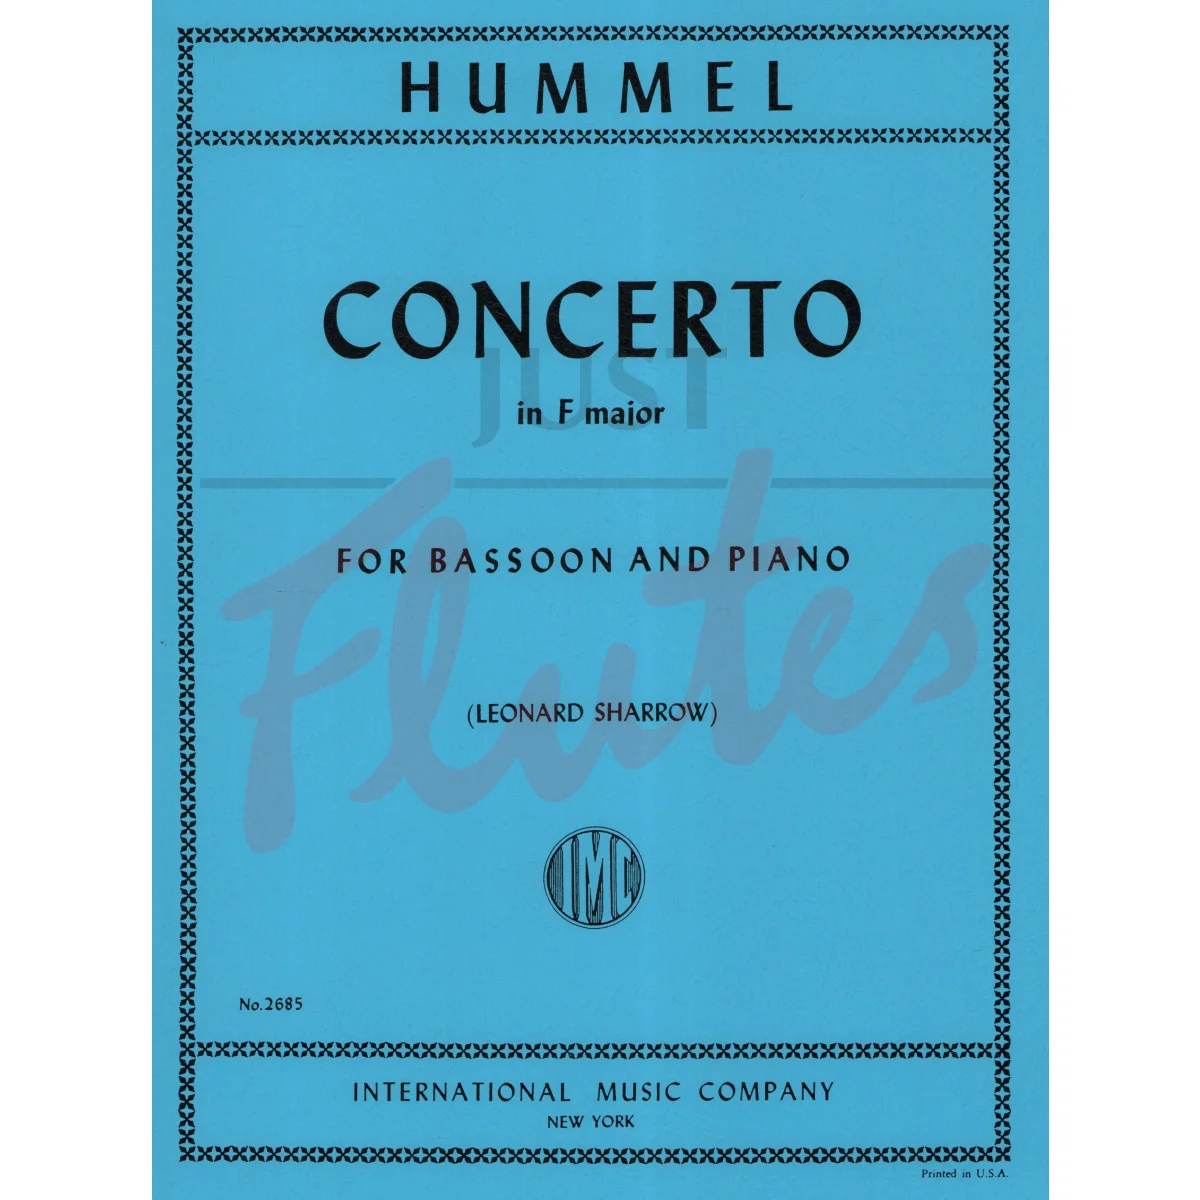 Concerto in F major for Bassoon and Piano